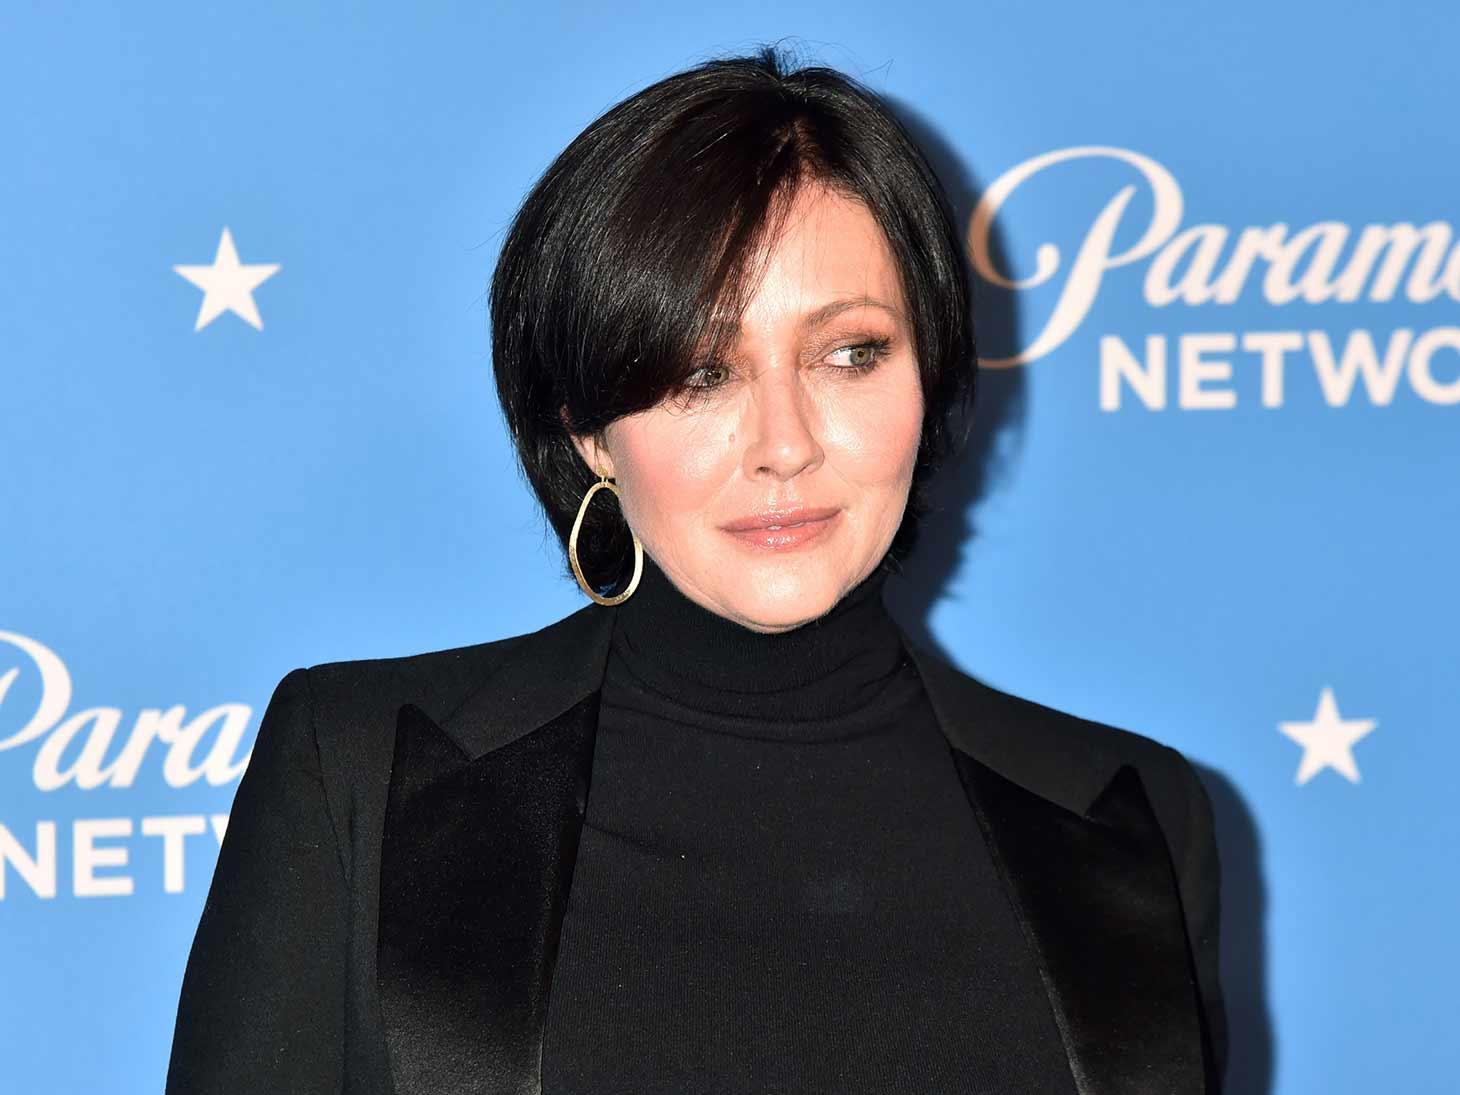 Shannen Doherty Claims Insurance Company Gave Her Hell Over Malibu Fire Damage While Dealing with Cancer